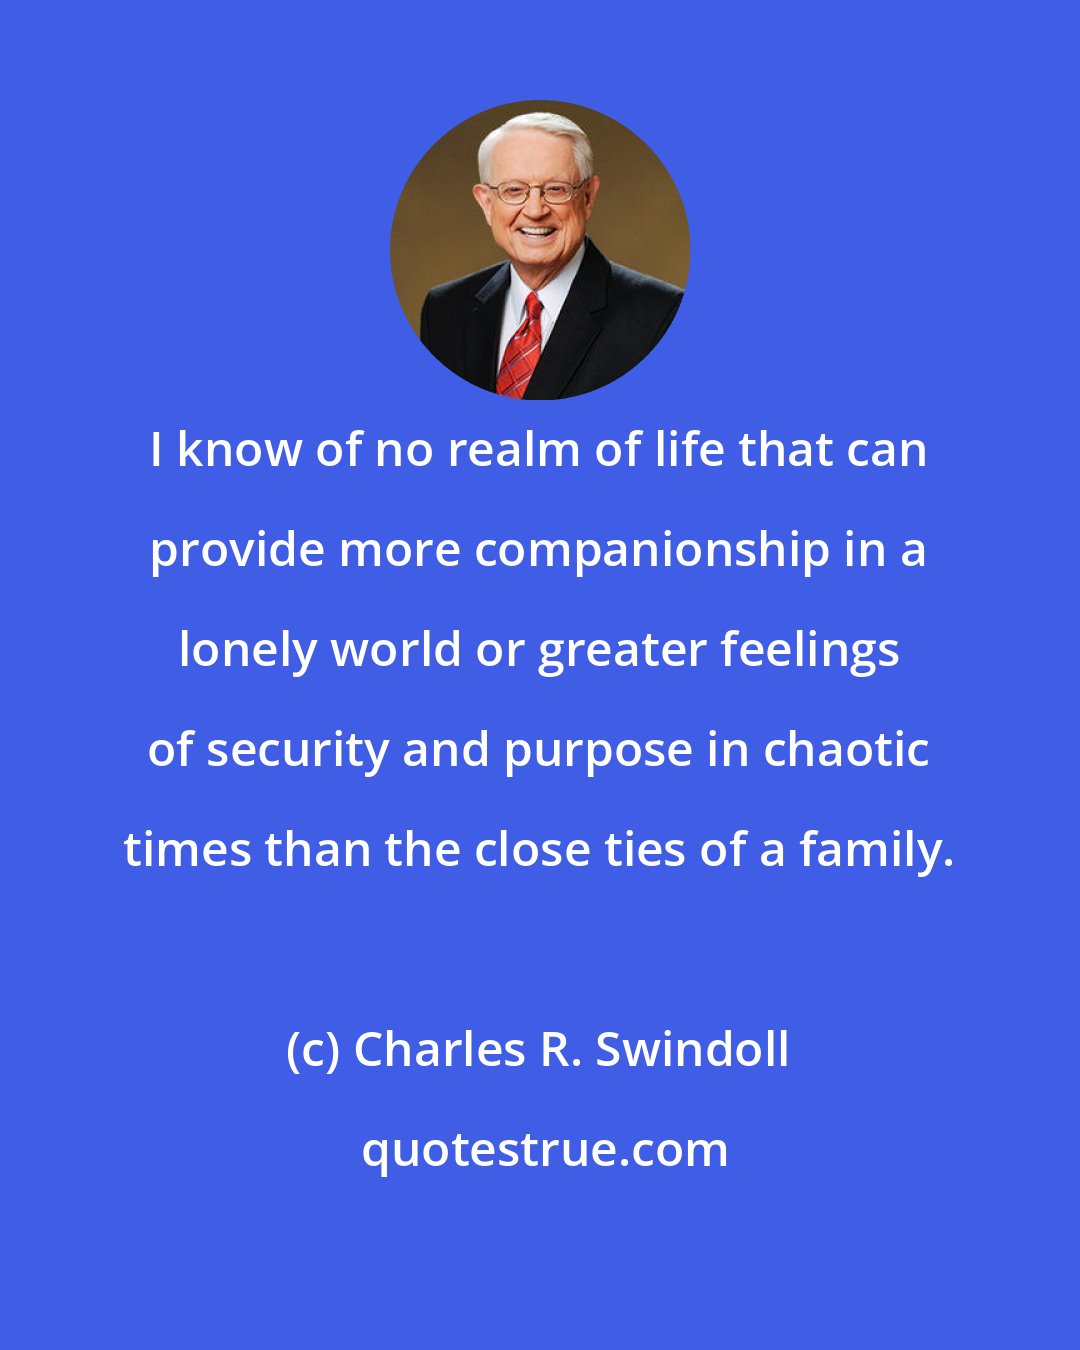 Charles R. Swindoll: I know of no realm of life that can provide more companionship in a lonely world or greater feelings of security and purpose in chaotic times than the close ties of a family.